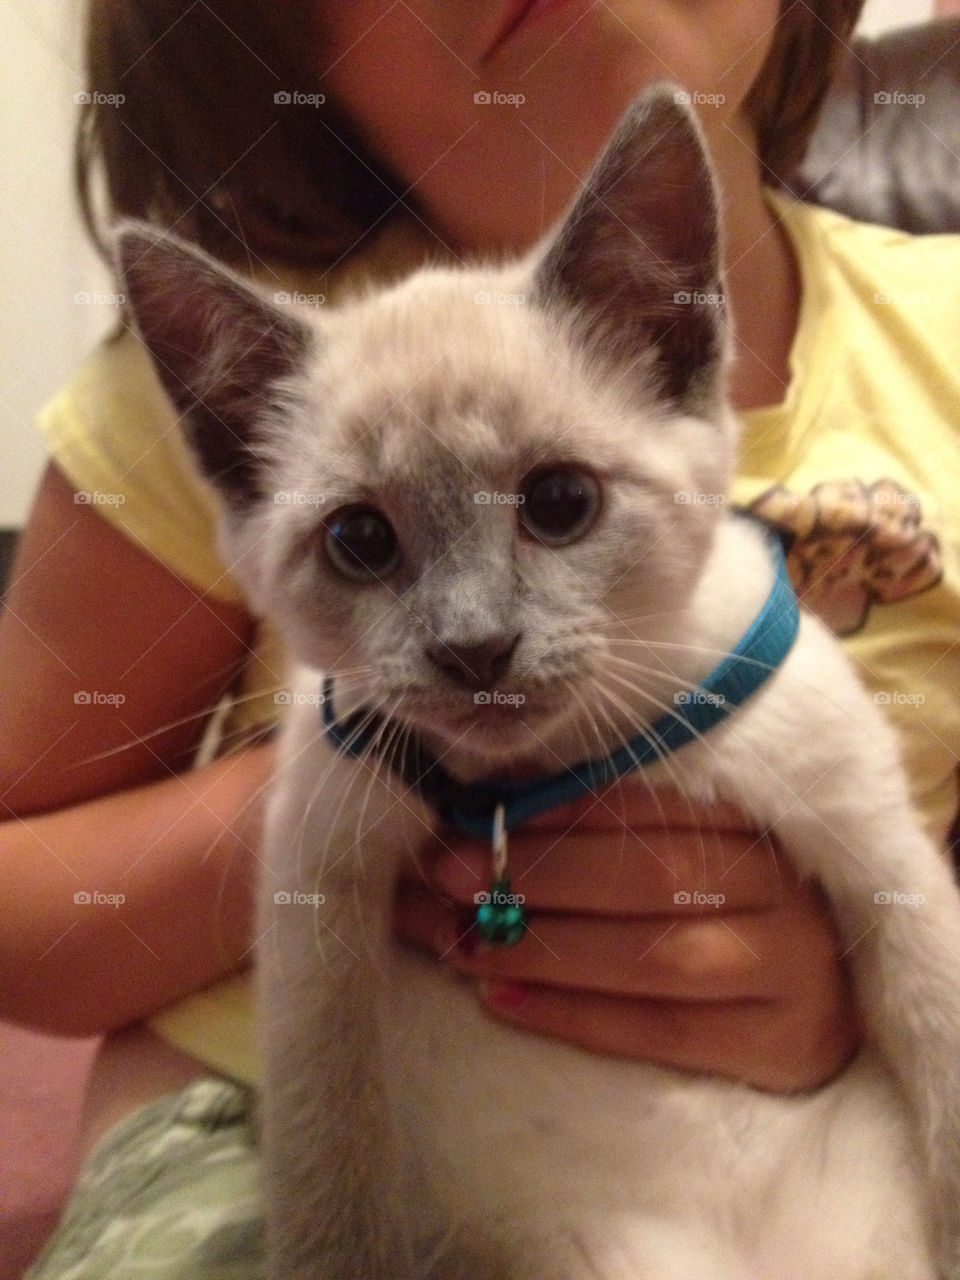 cats precious siamese kitten by sarahrutherford